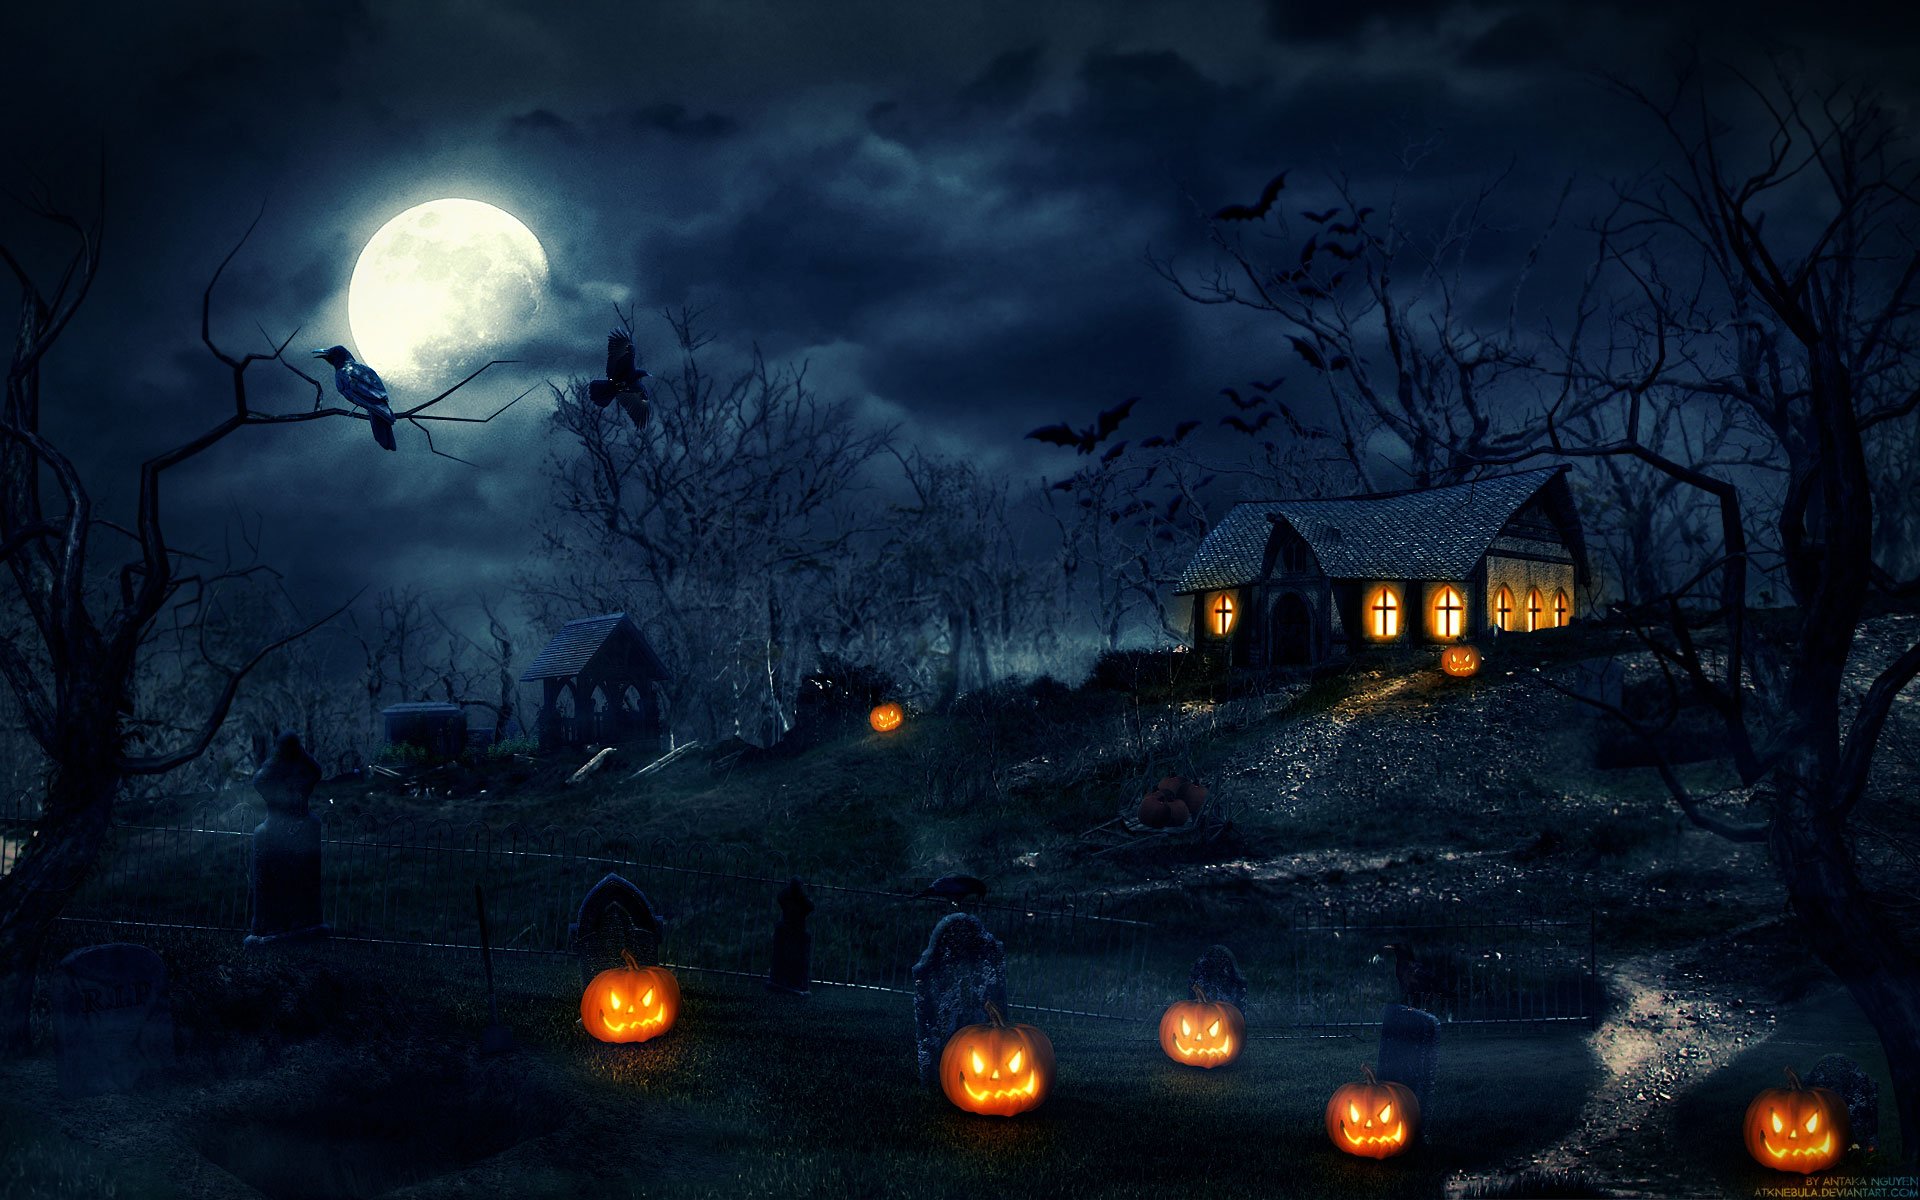 Free Scary Halloween Backgrounds Wallpaper Collection 2014 HD Wallpapers Download Free Images Wallpaper [wallpaper981.blogspot.com]